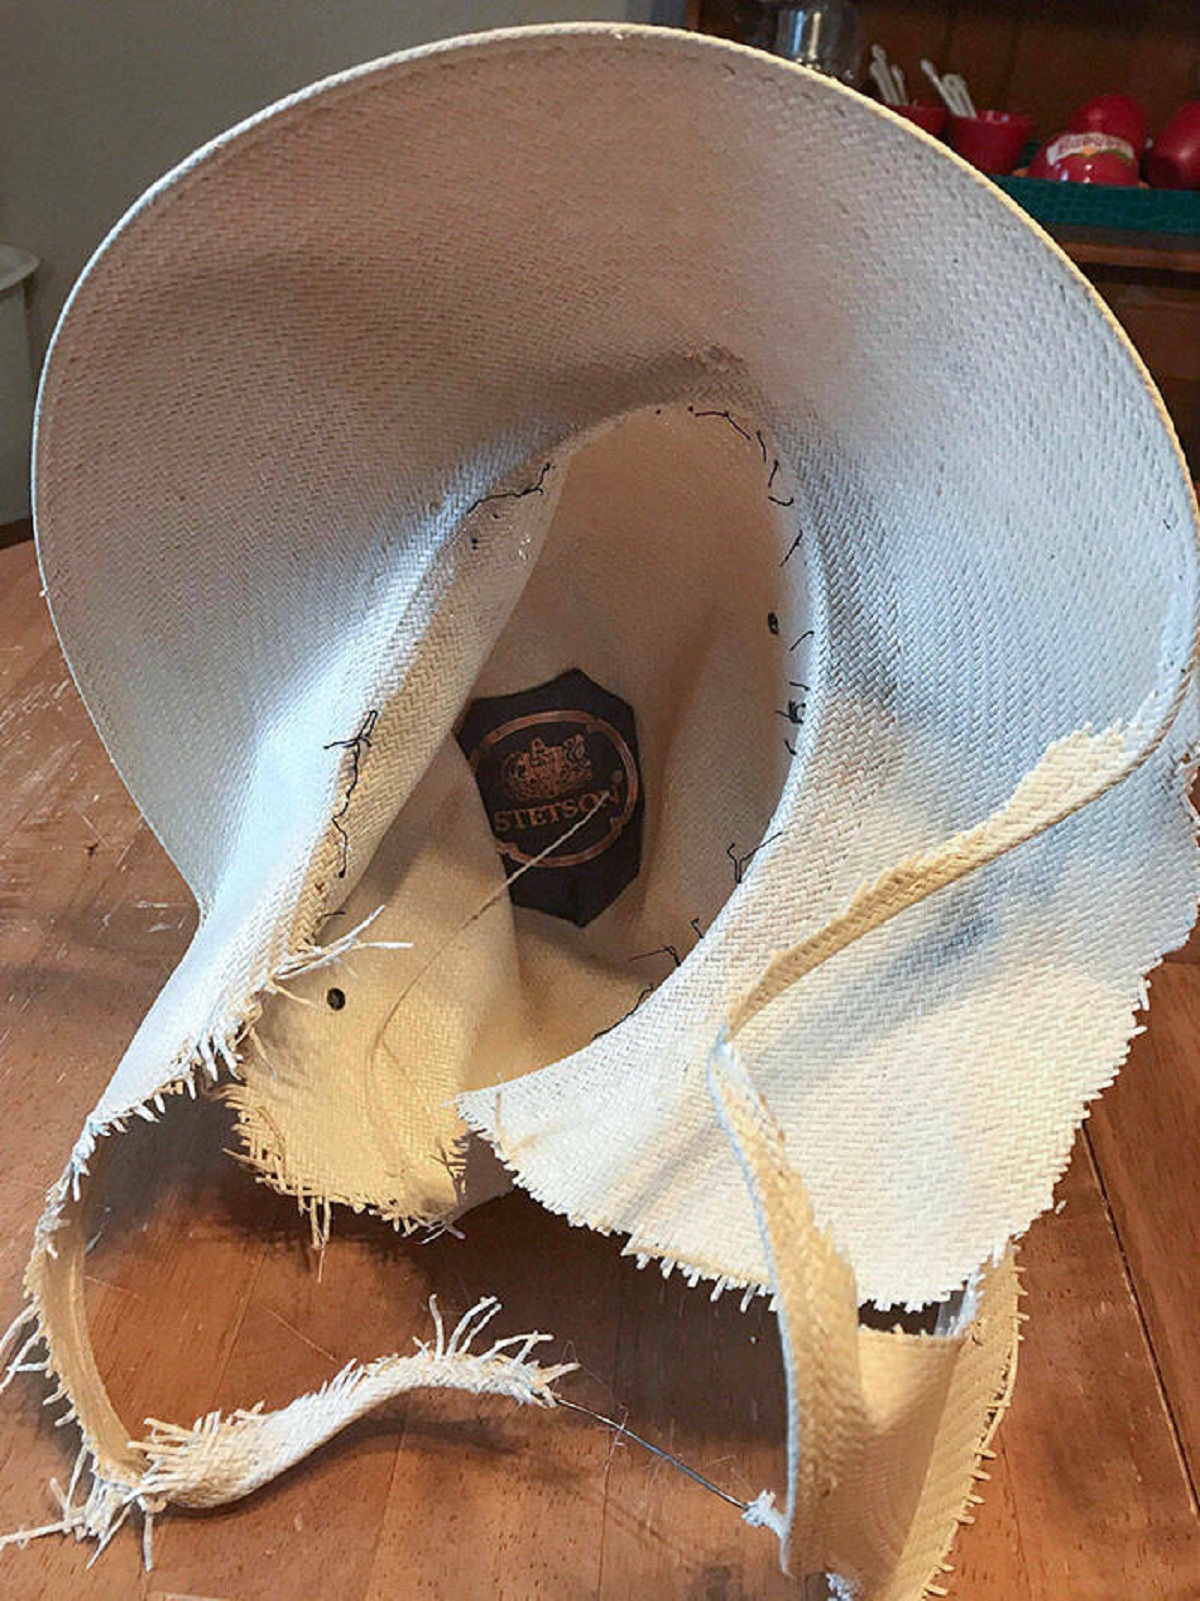 "My Wife Didn't Put Away Her $300.00 Stetson Hat. Our Dog Reminded Her"